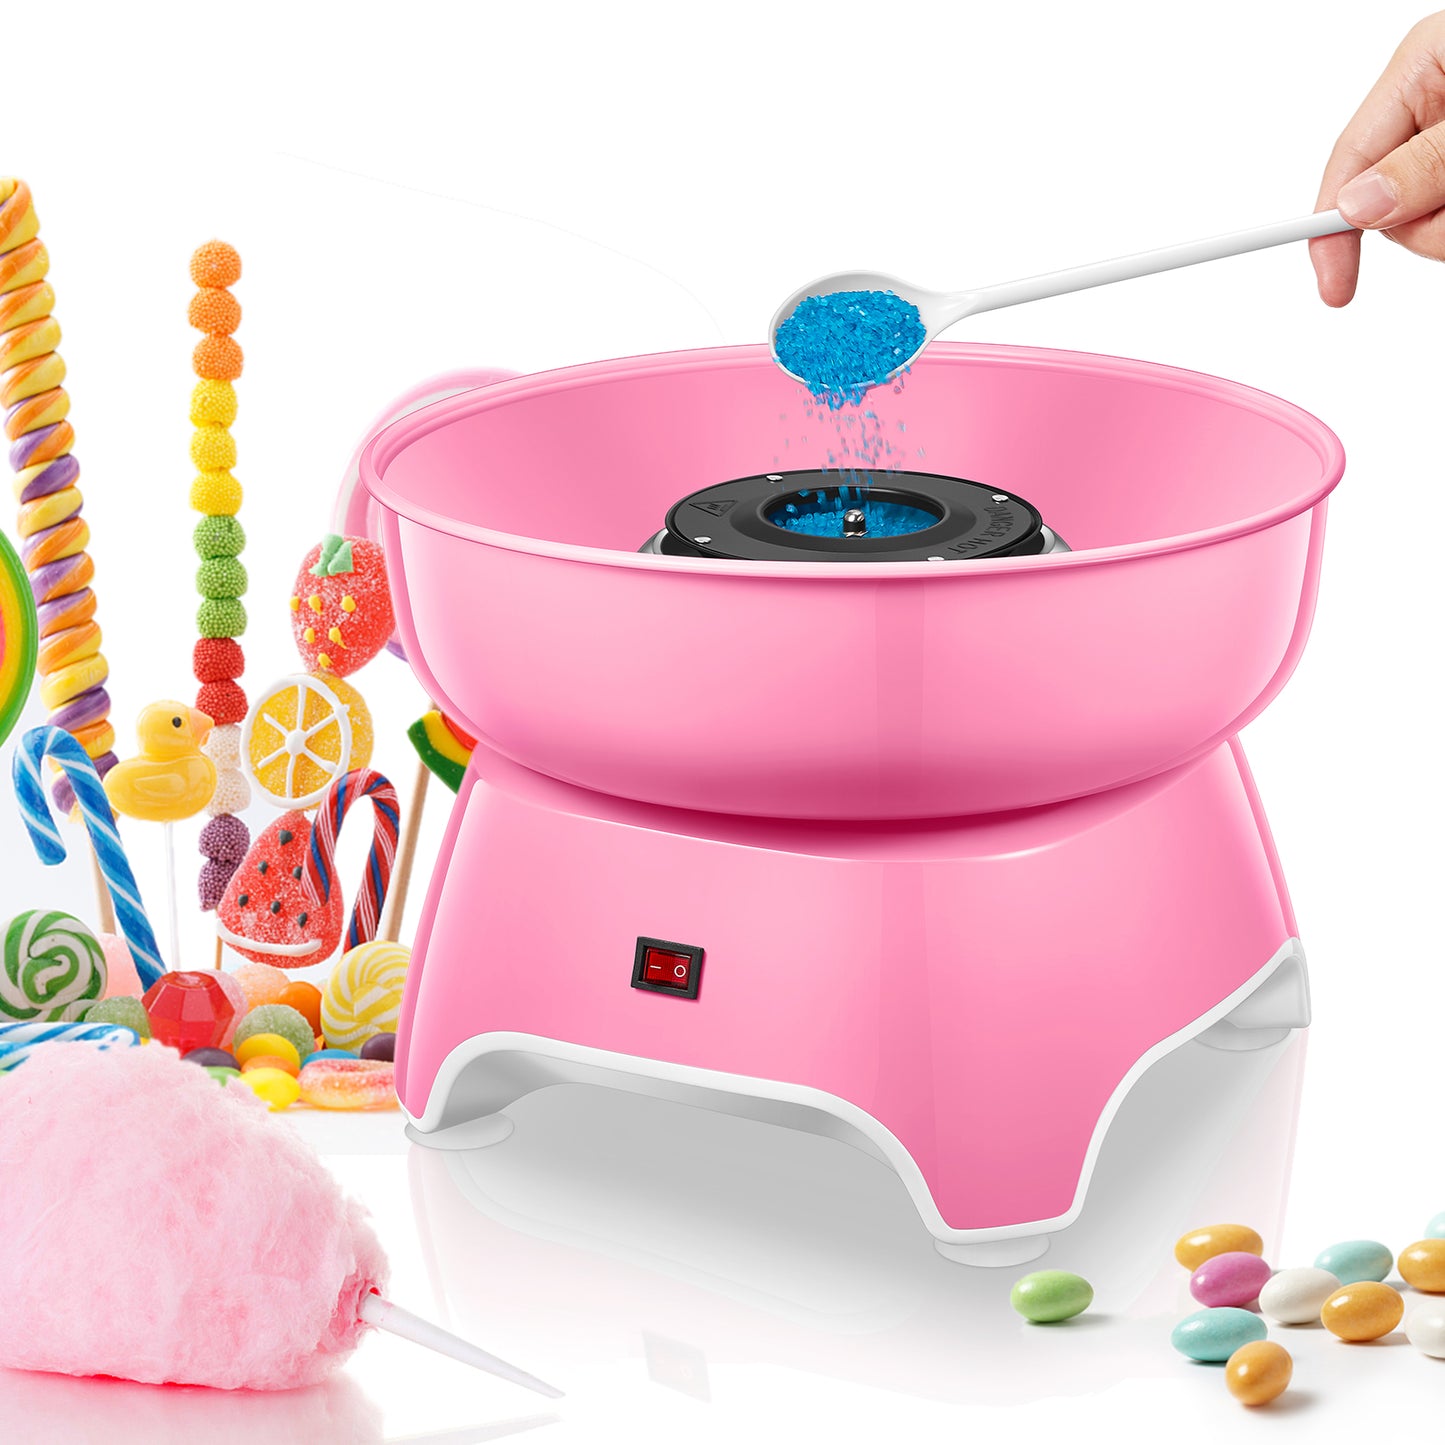 Candy Floss Maker FOHERE Cotton Candy Machine with Wooden Sticks and Sugar Scoop, Easy to Use, Gift for Children's Birthday Party